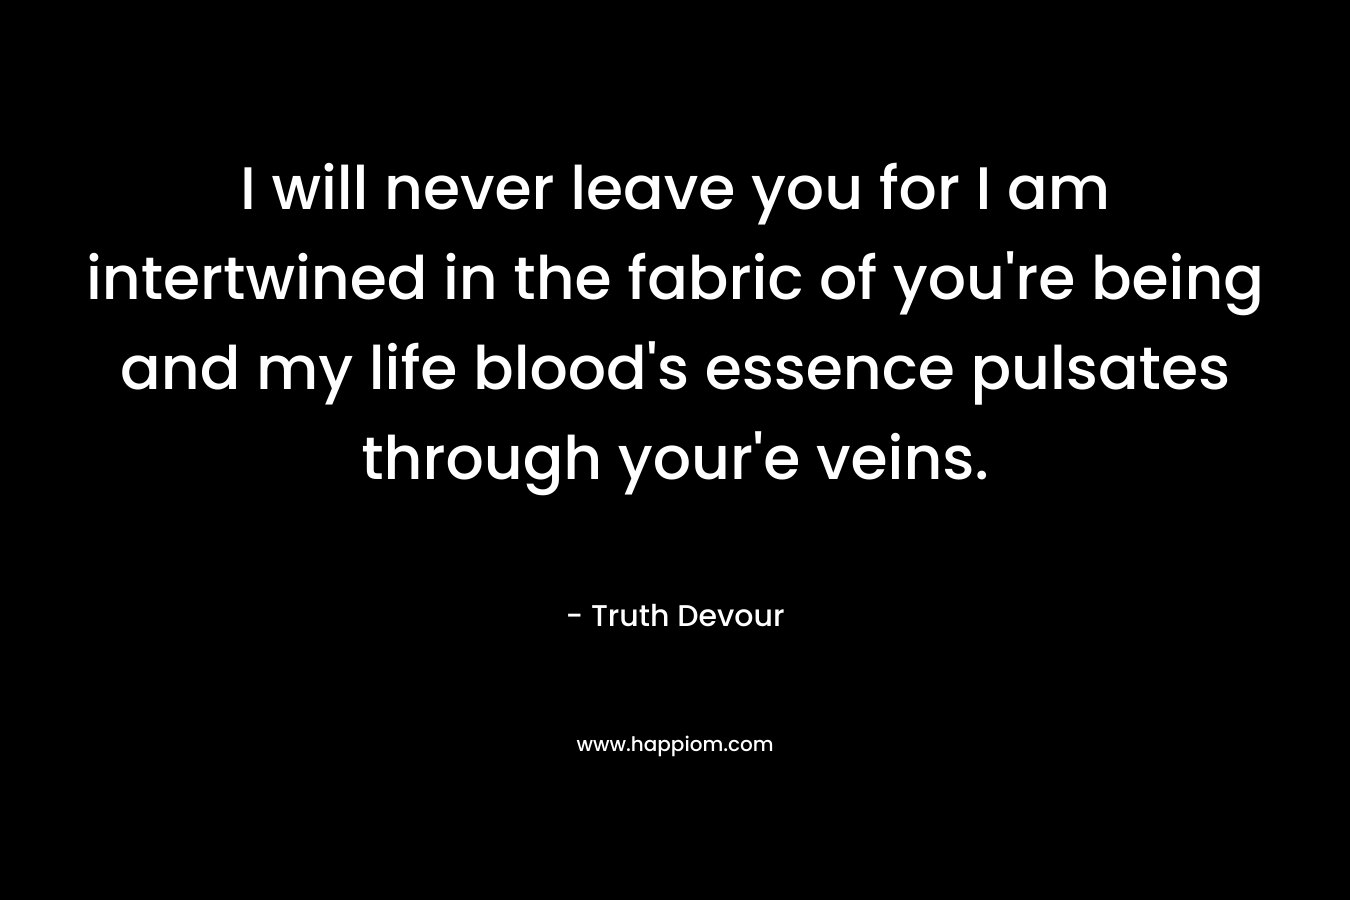 I will never leave you for I am intertwined in the fabric of you’re being and my life blood’s essence pulsates through your’e veins. – Truth Devour